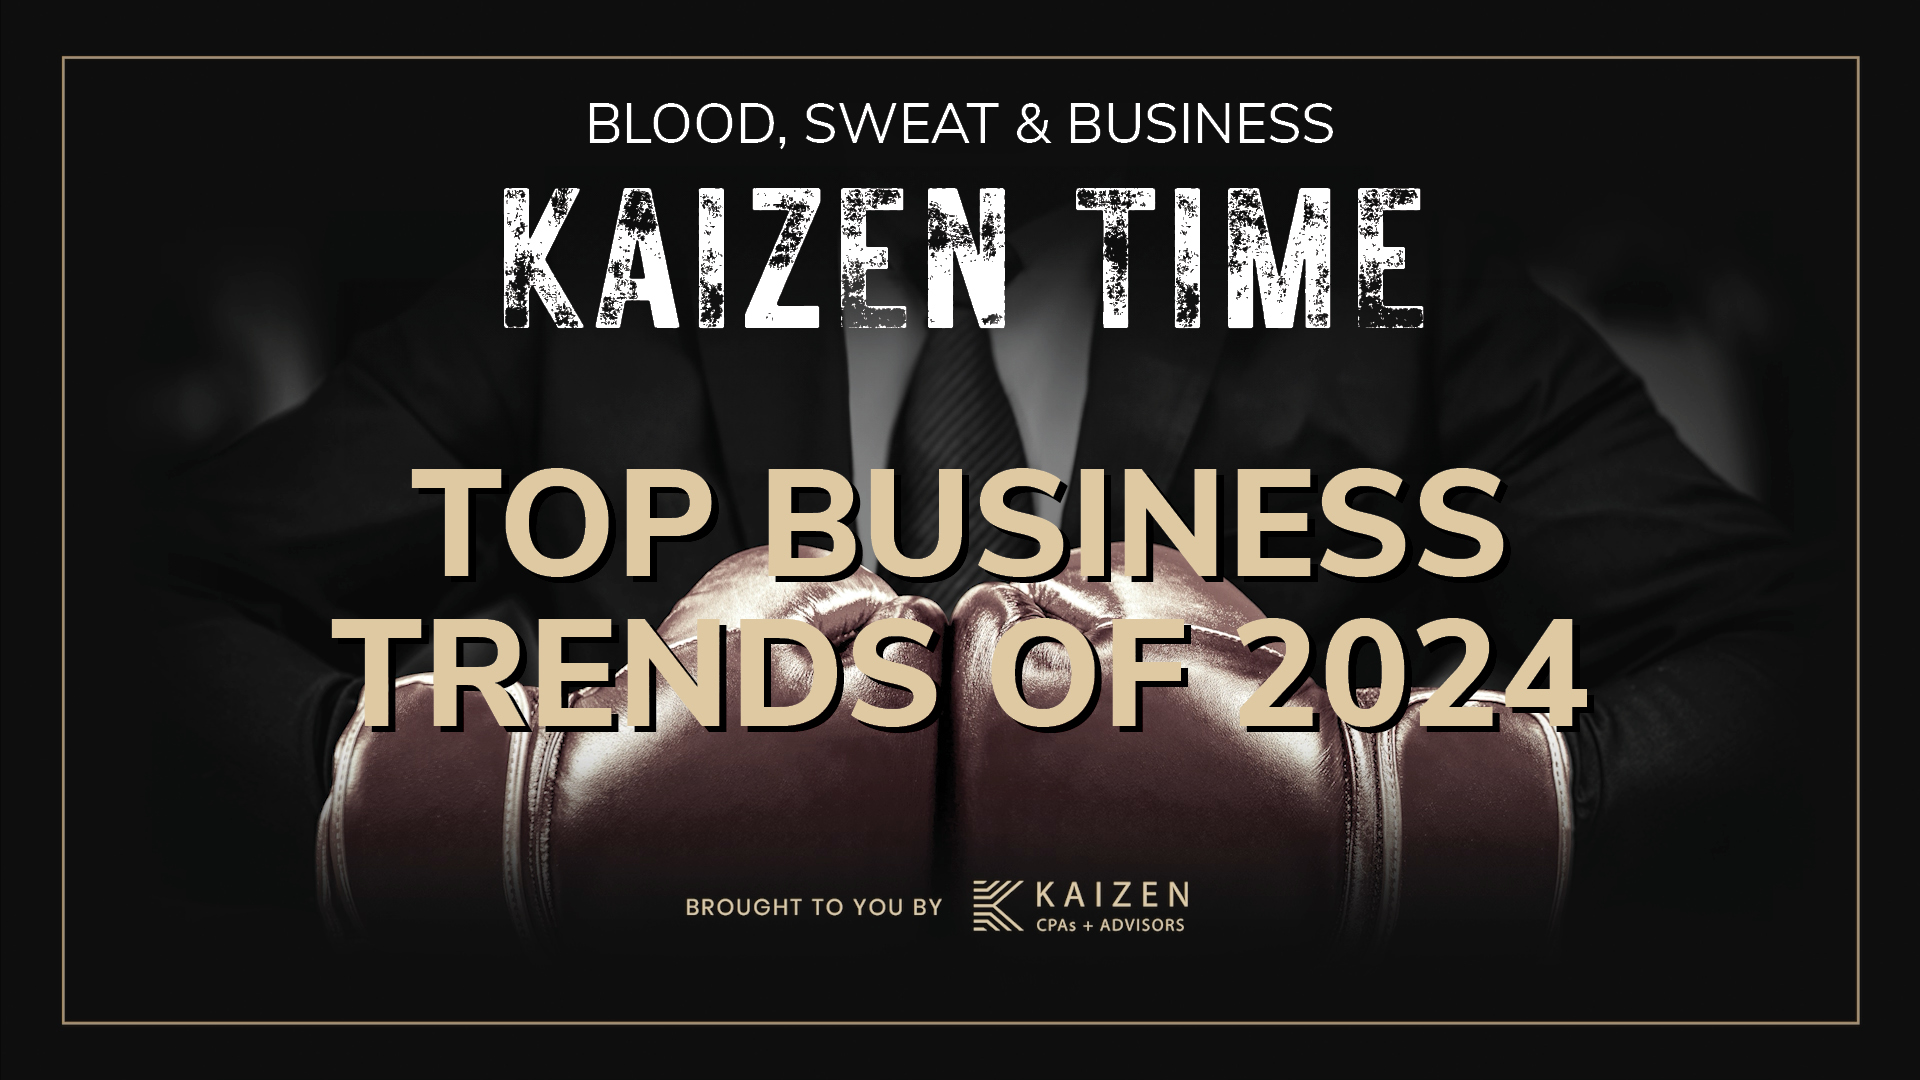 Top Business Trends of 2024